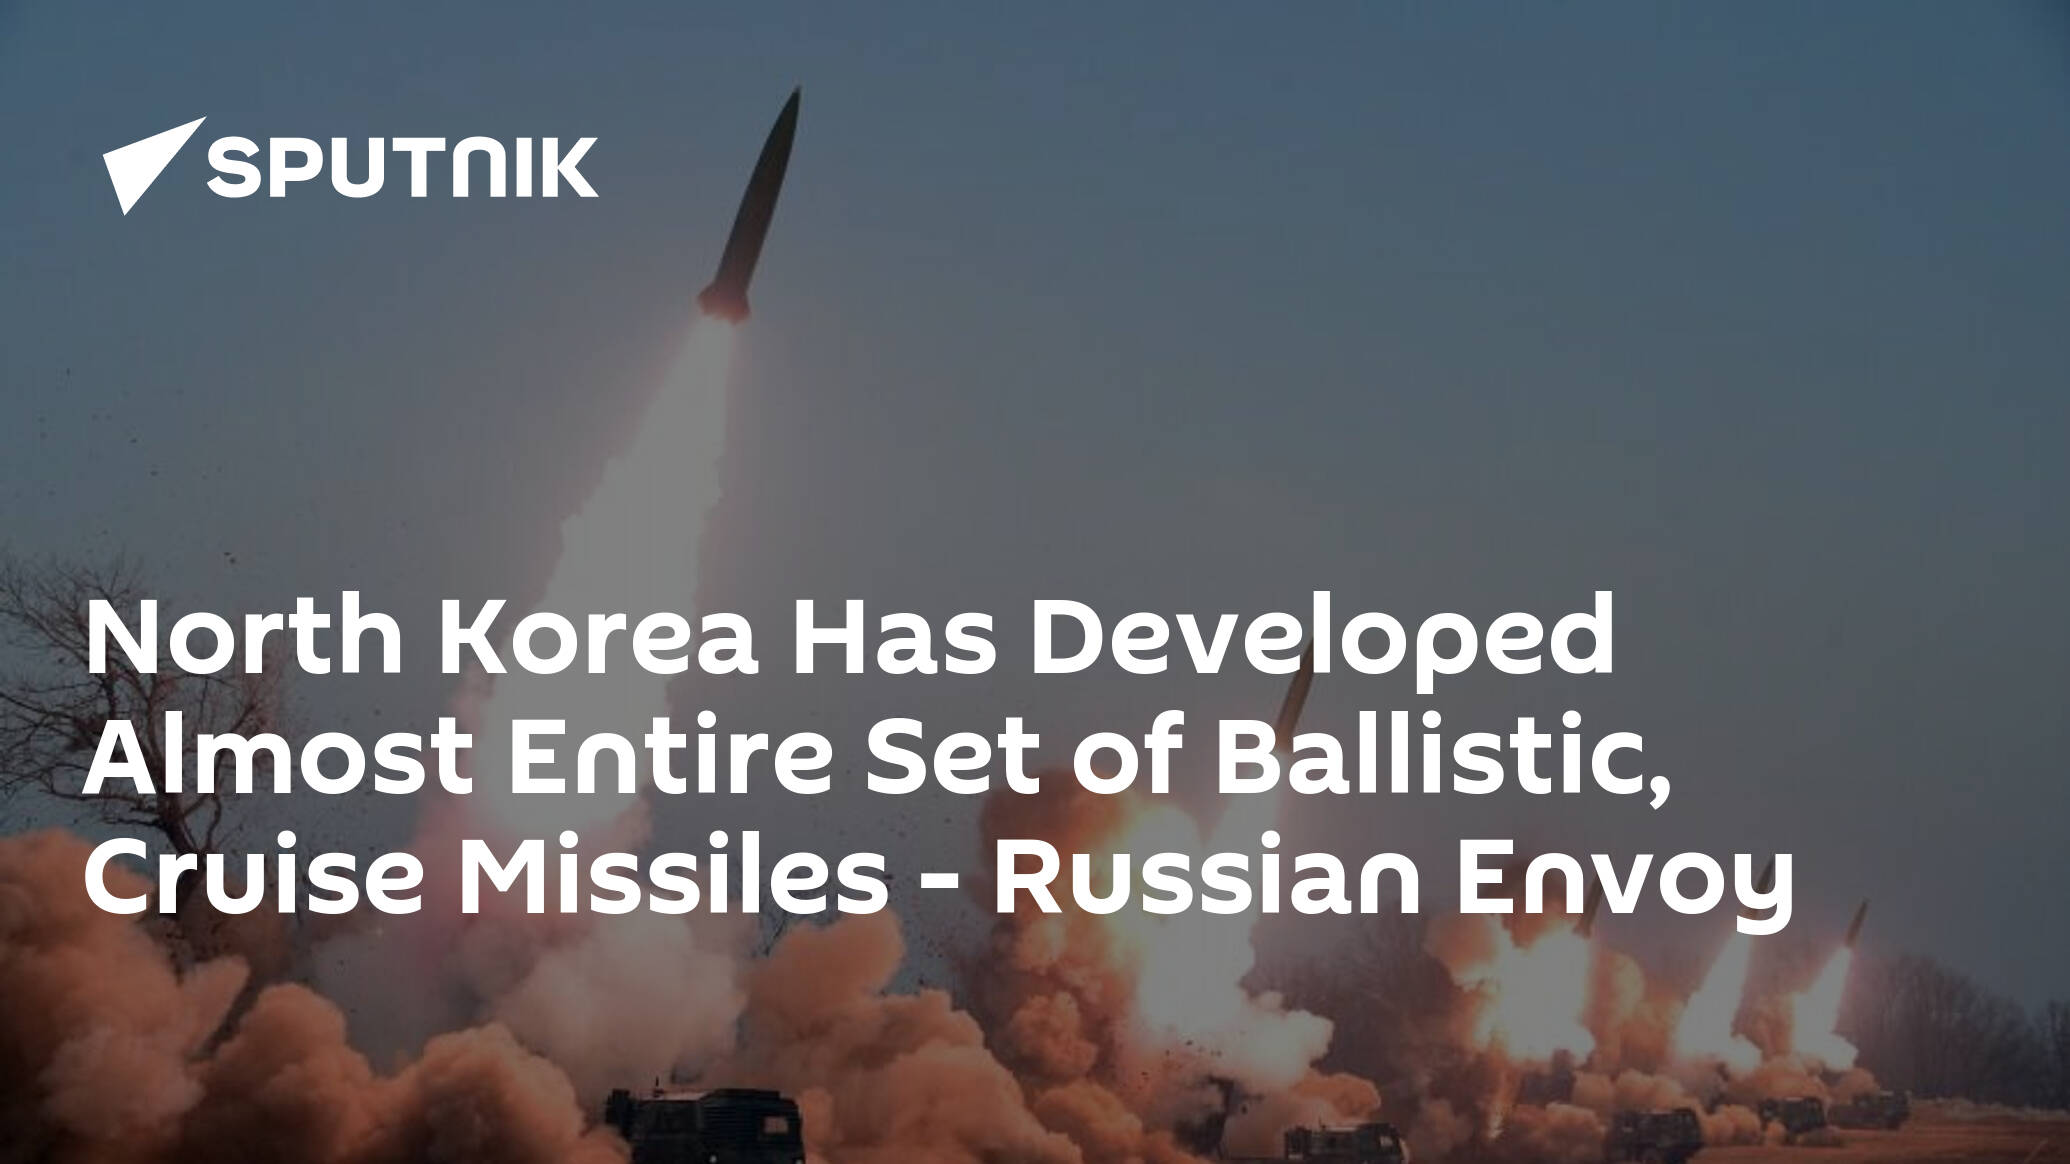 North Korea Has Developed Almost Entire Set of Ballistic, Cruise Missiles – Russian Envoy